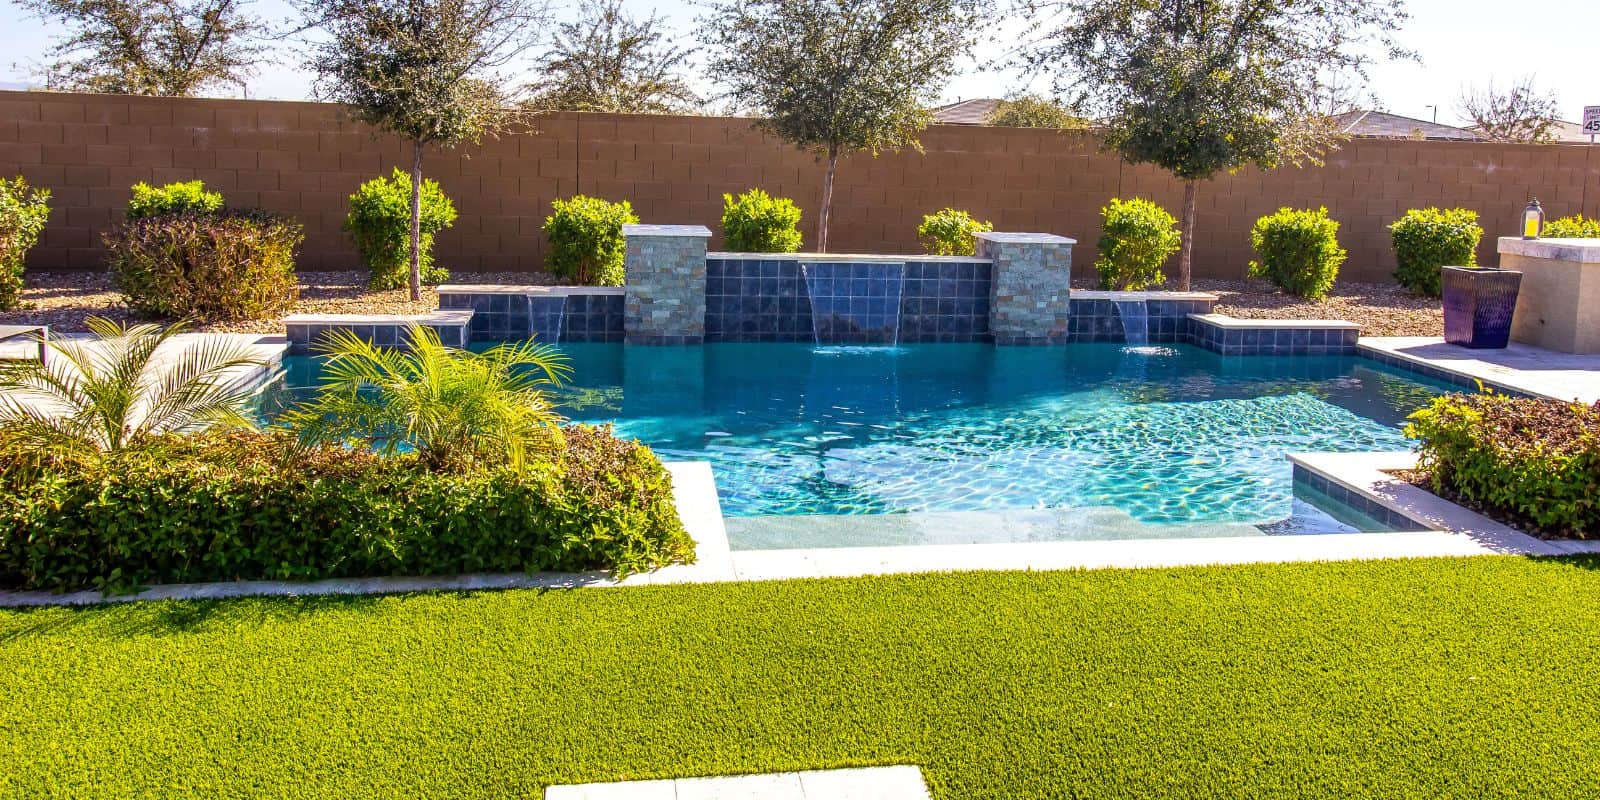 How To Get Grass Out Of Pool